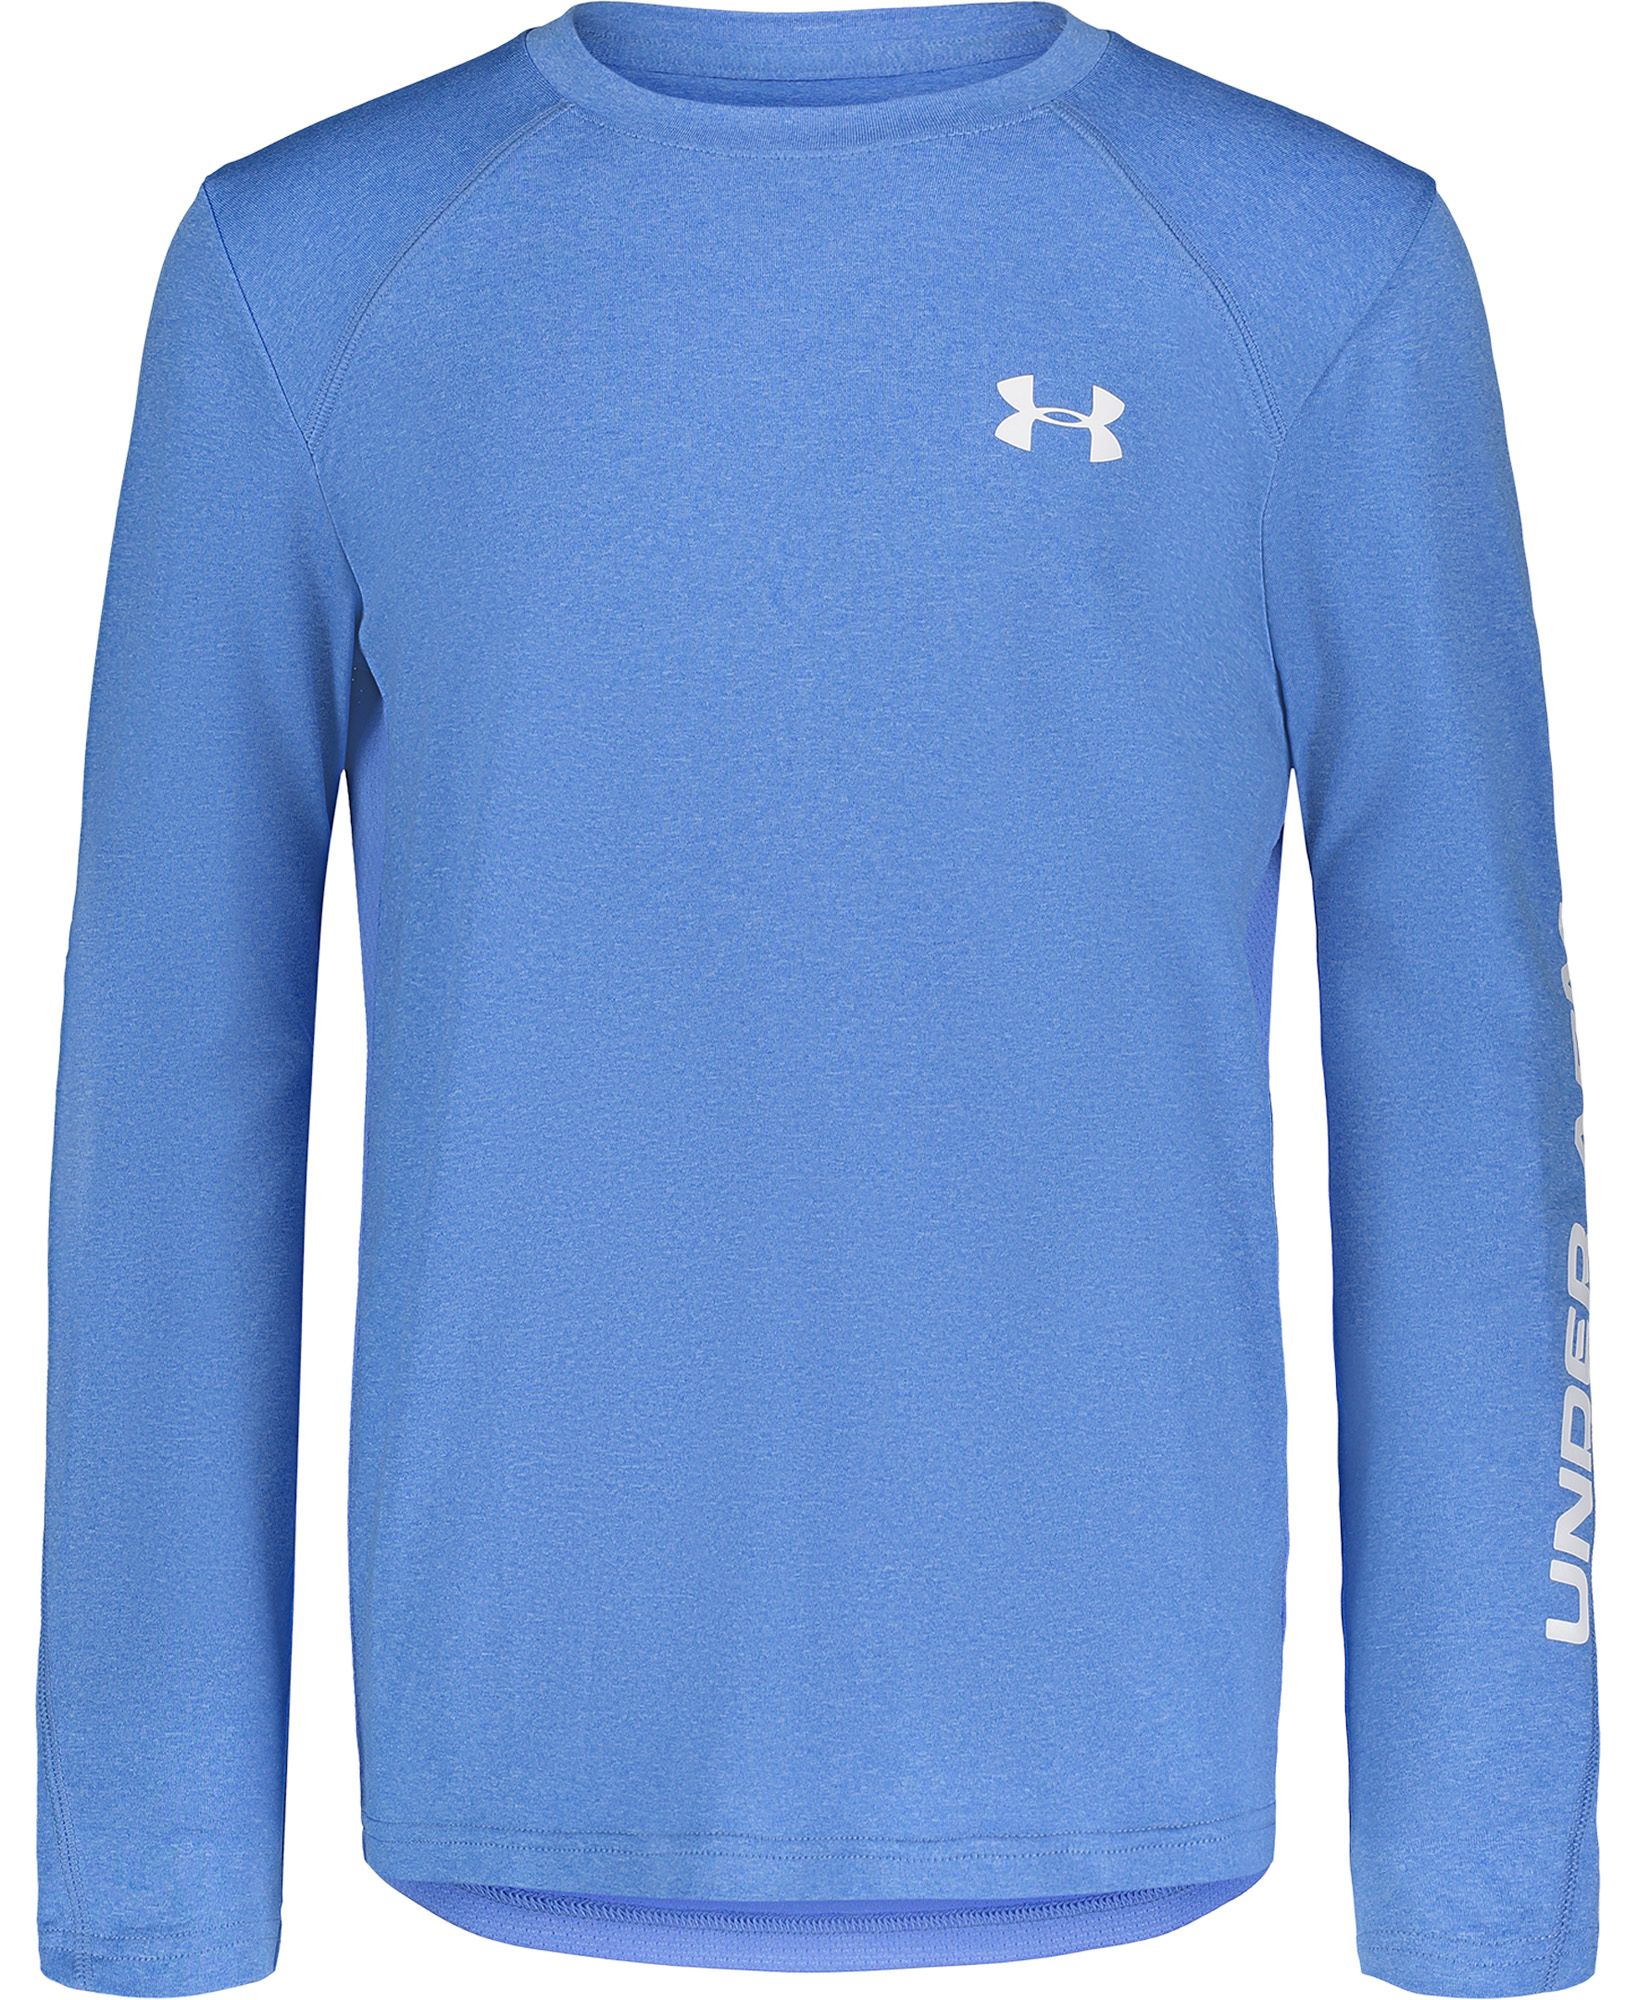 under armour fishing shirts clearance